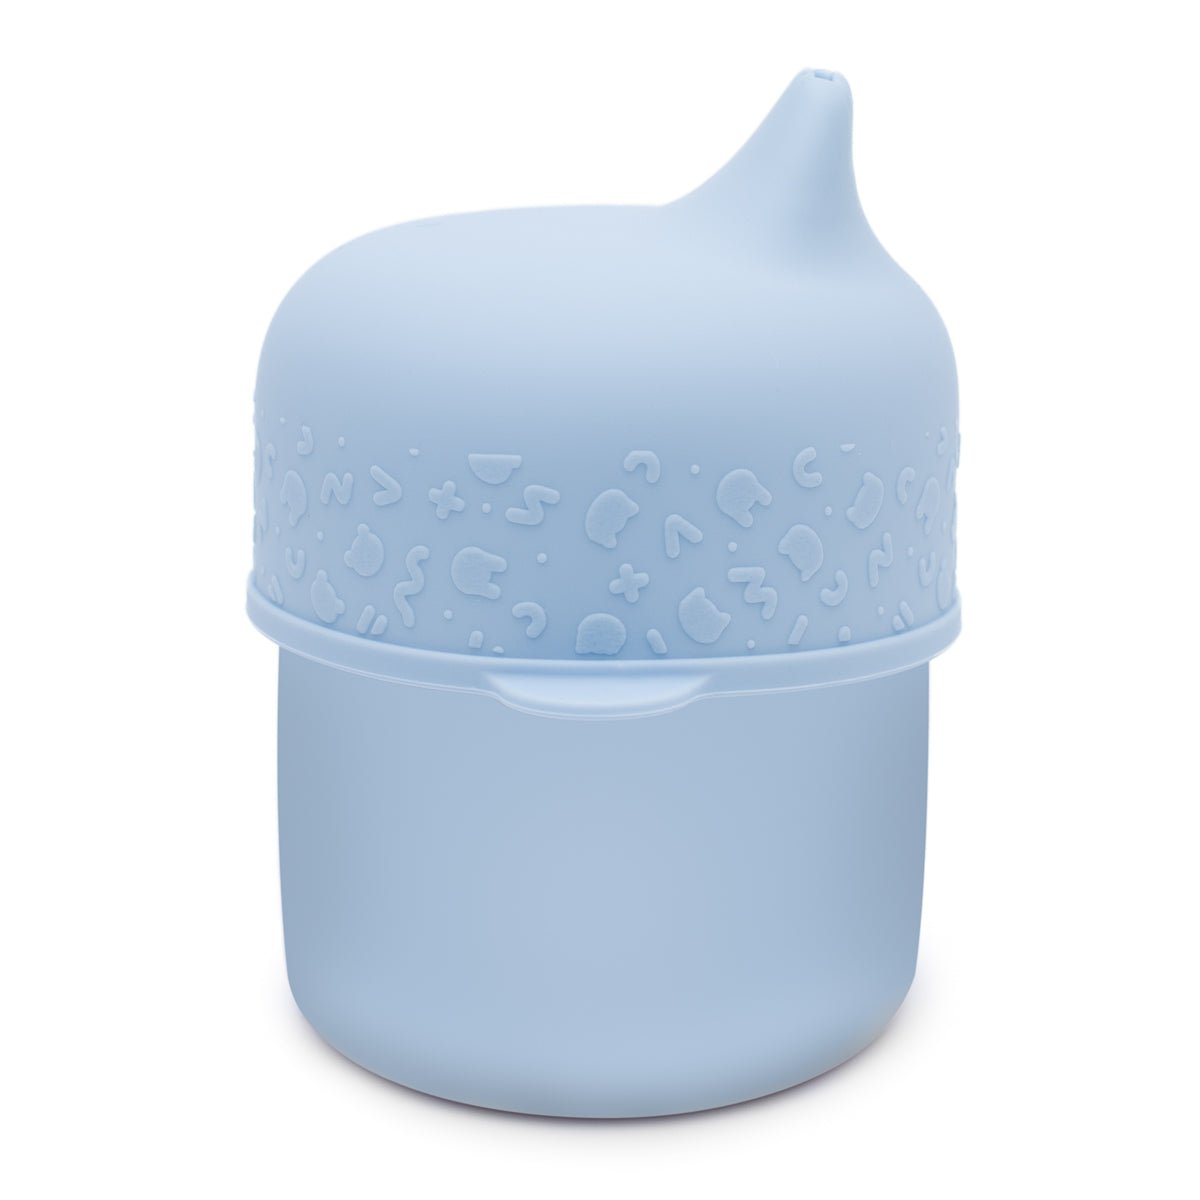 Sippie Cup Set in Powder Blue without Straw